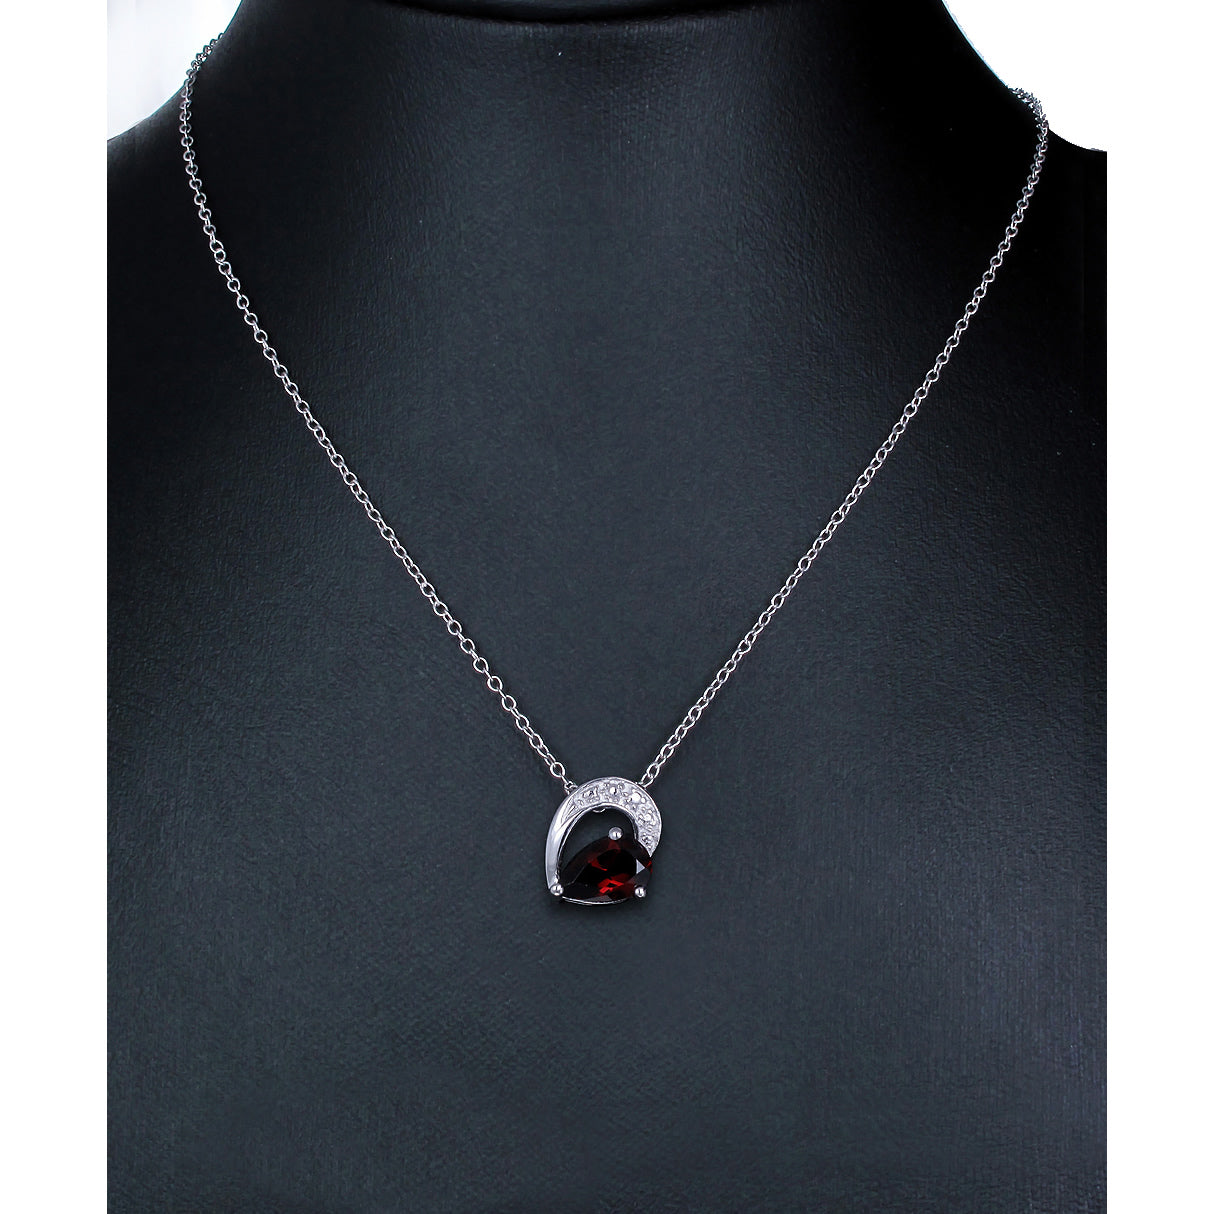 0.90 cttw Pendant Necklace, Garnet Pear Shape Pendant Necklace for Women in .925 Sterling Silver with Rhodium, 18 Inch Chain, Prong Setting